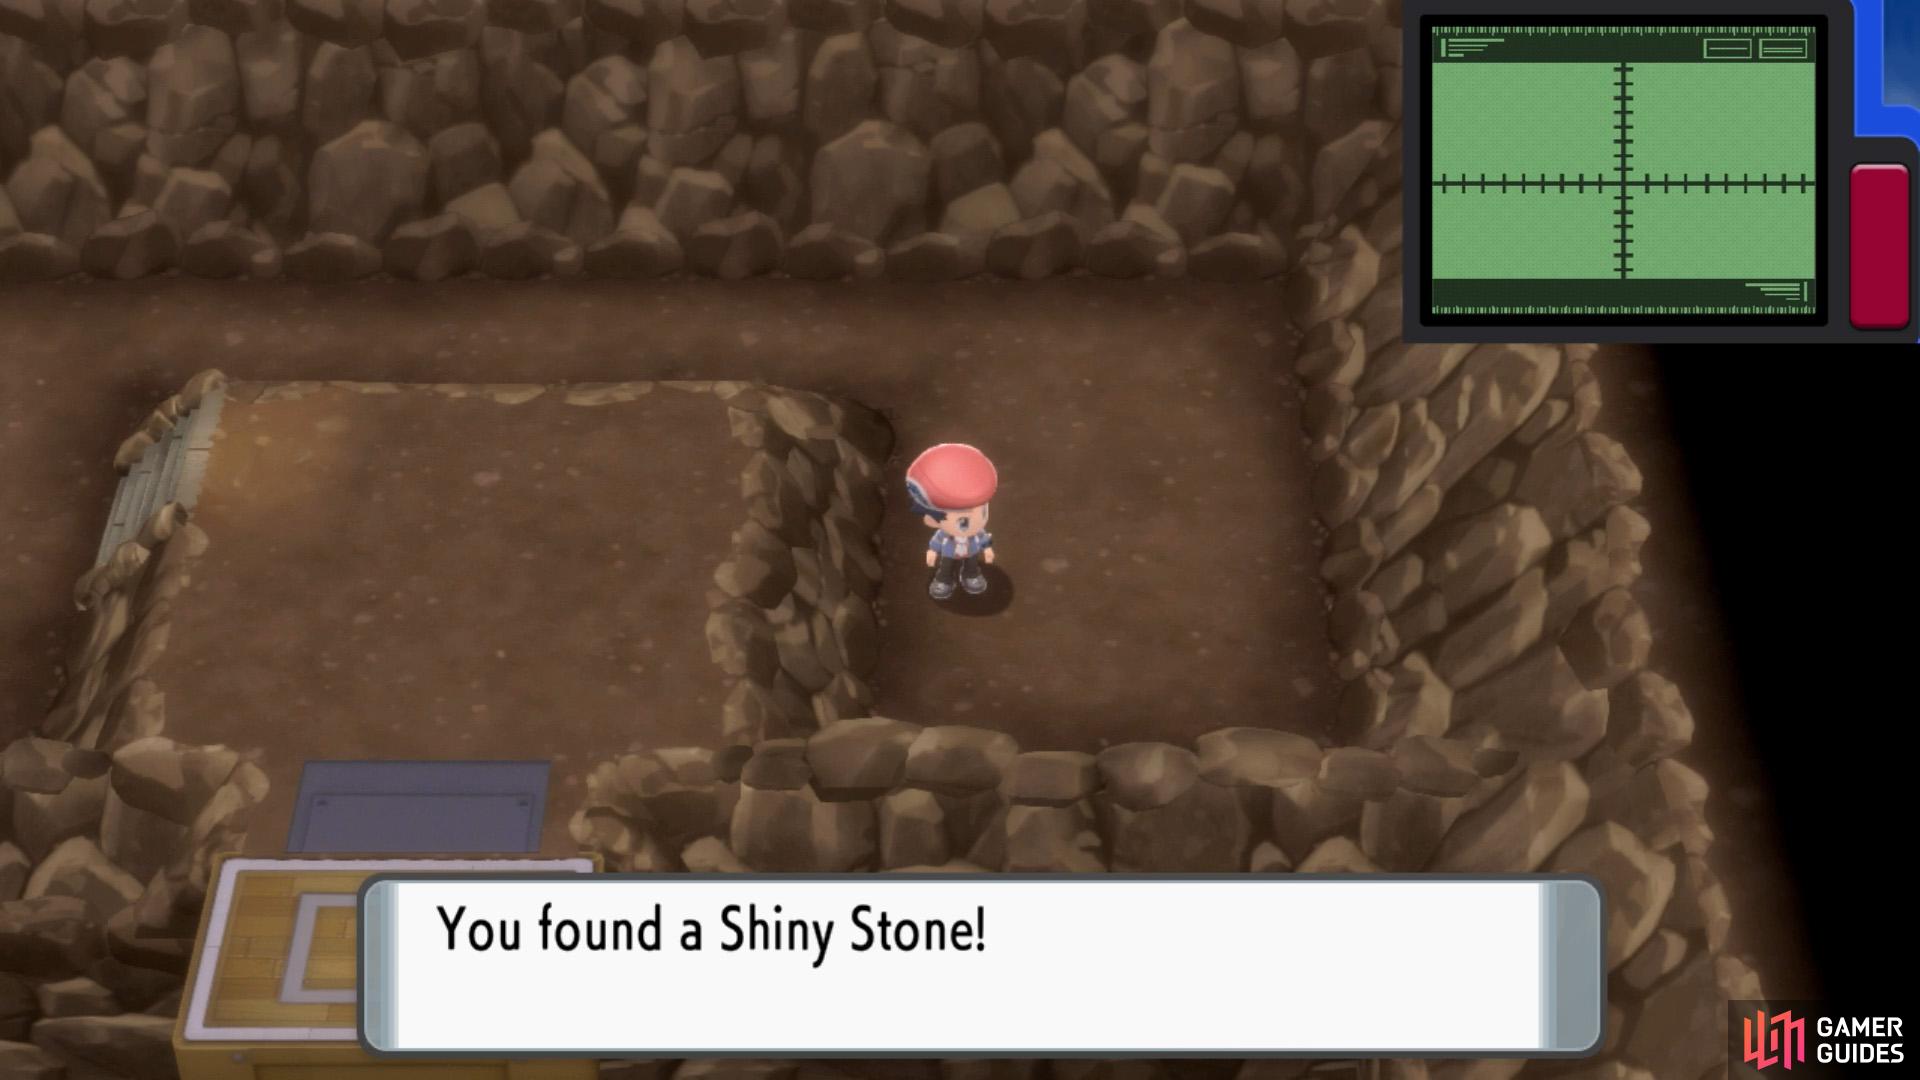 There aren't many Shiny Stones to be found.